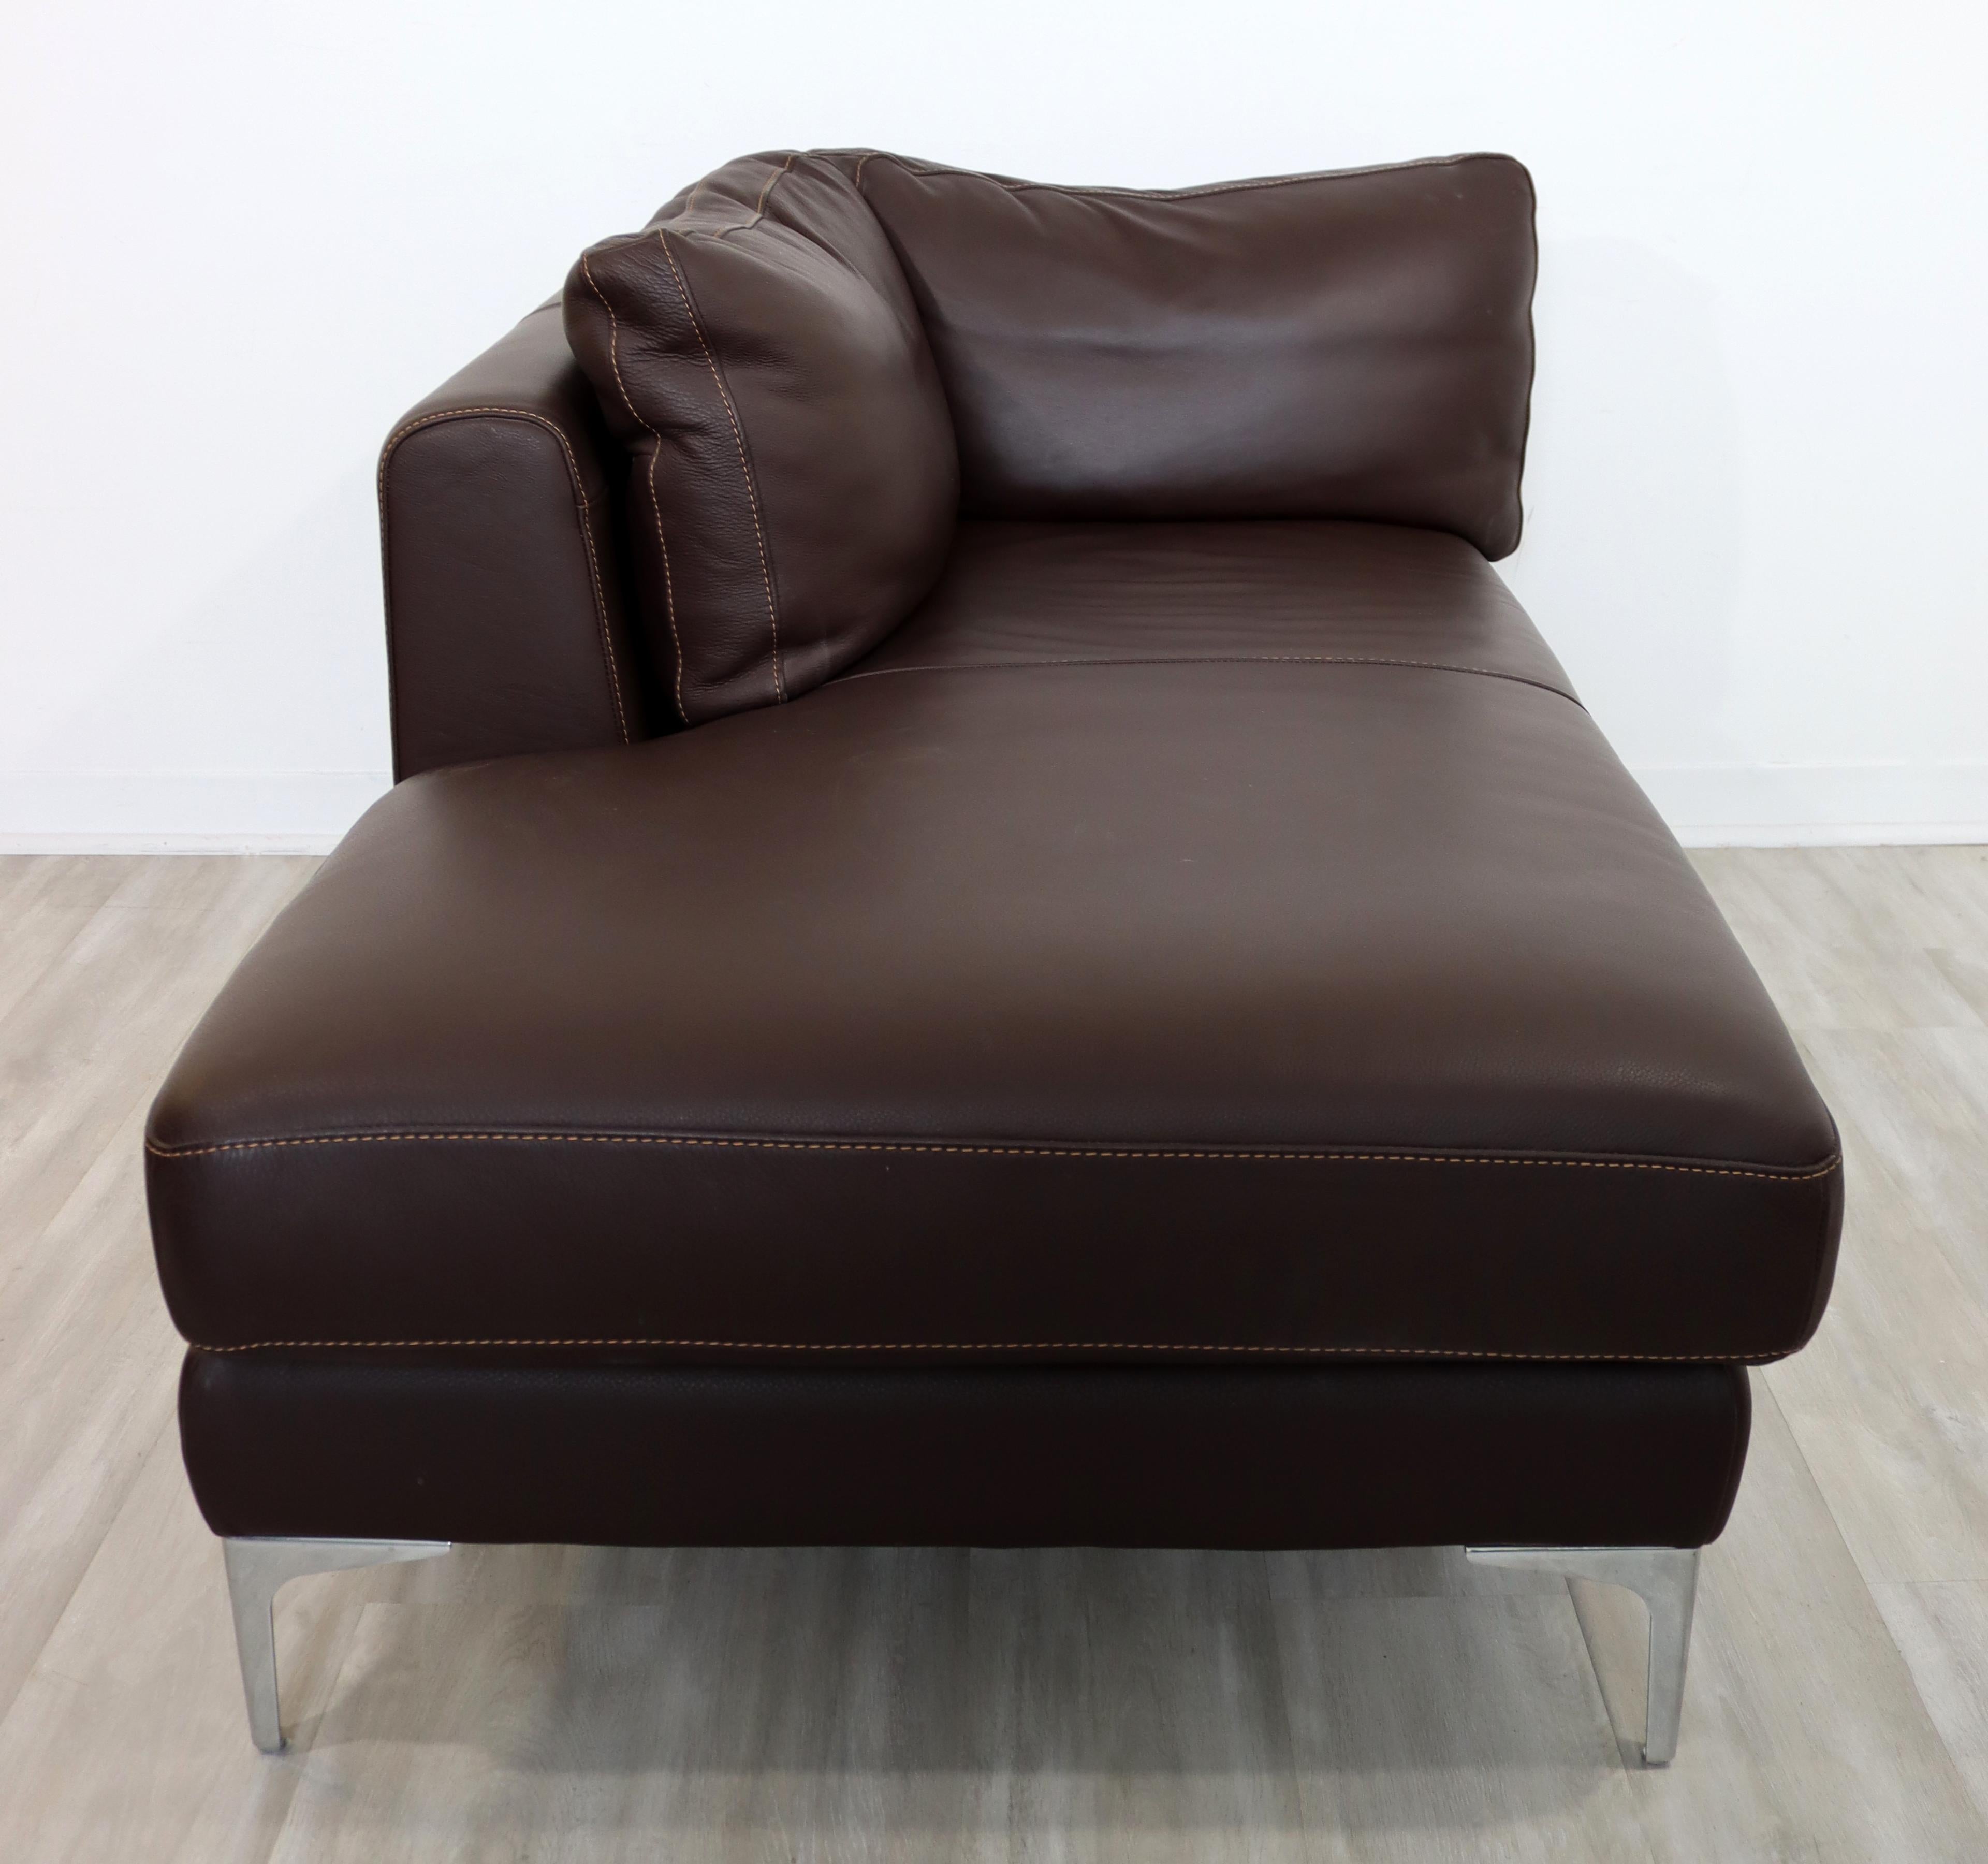 brown chaise lounge